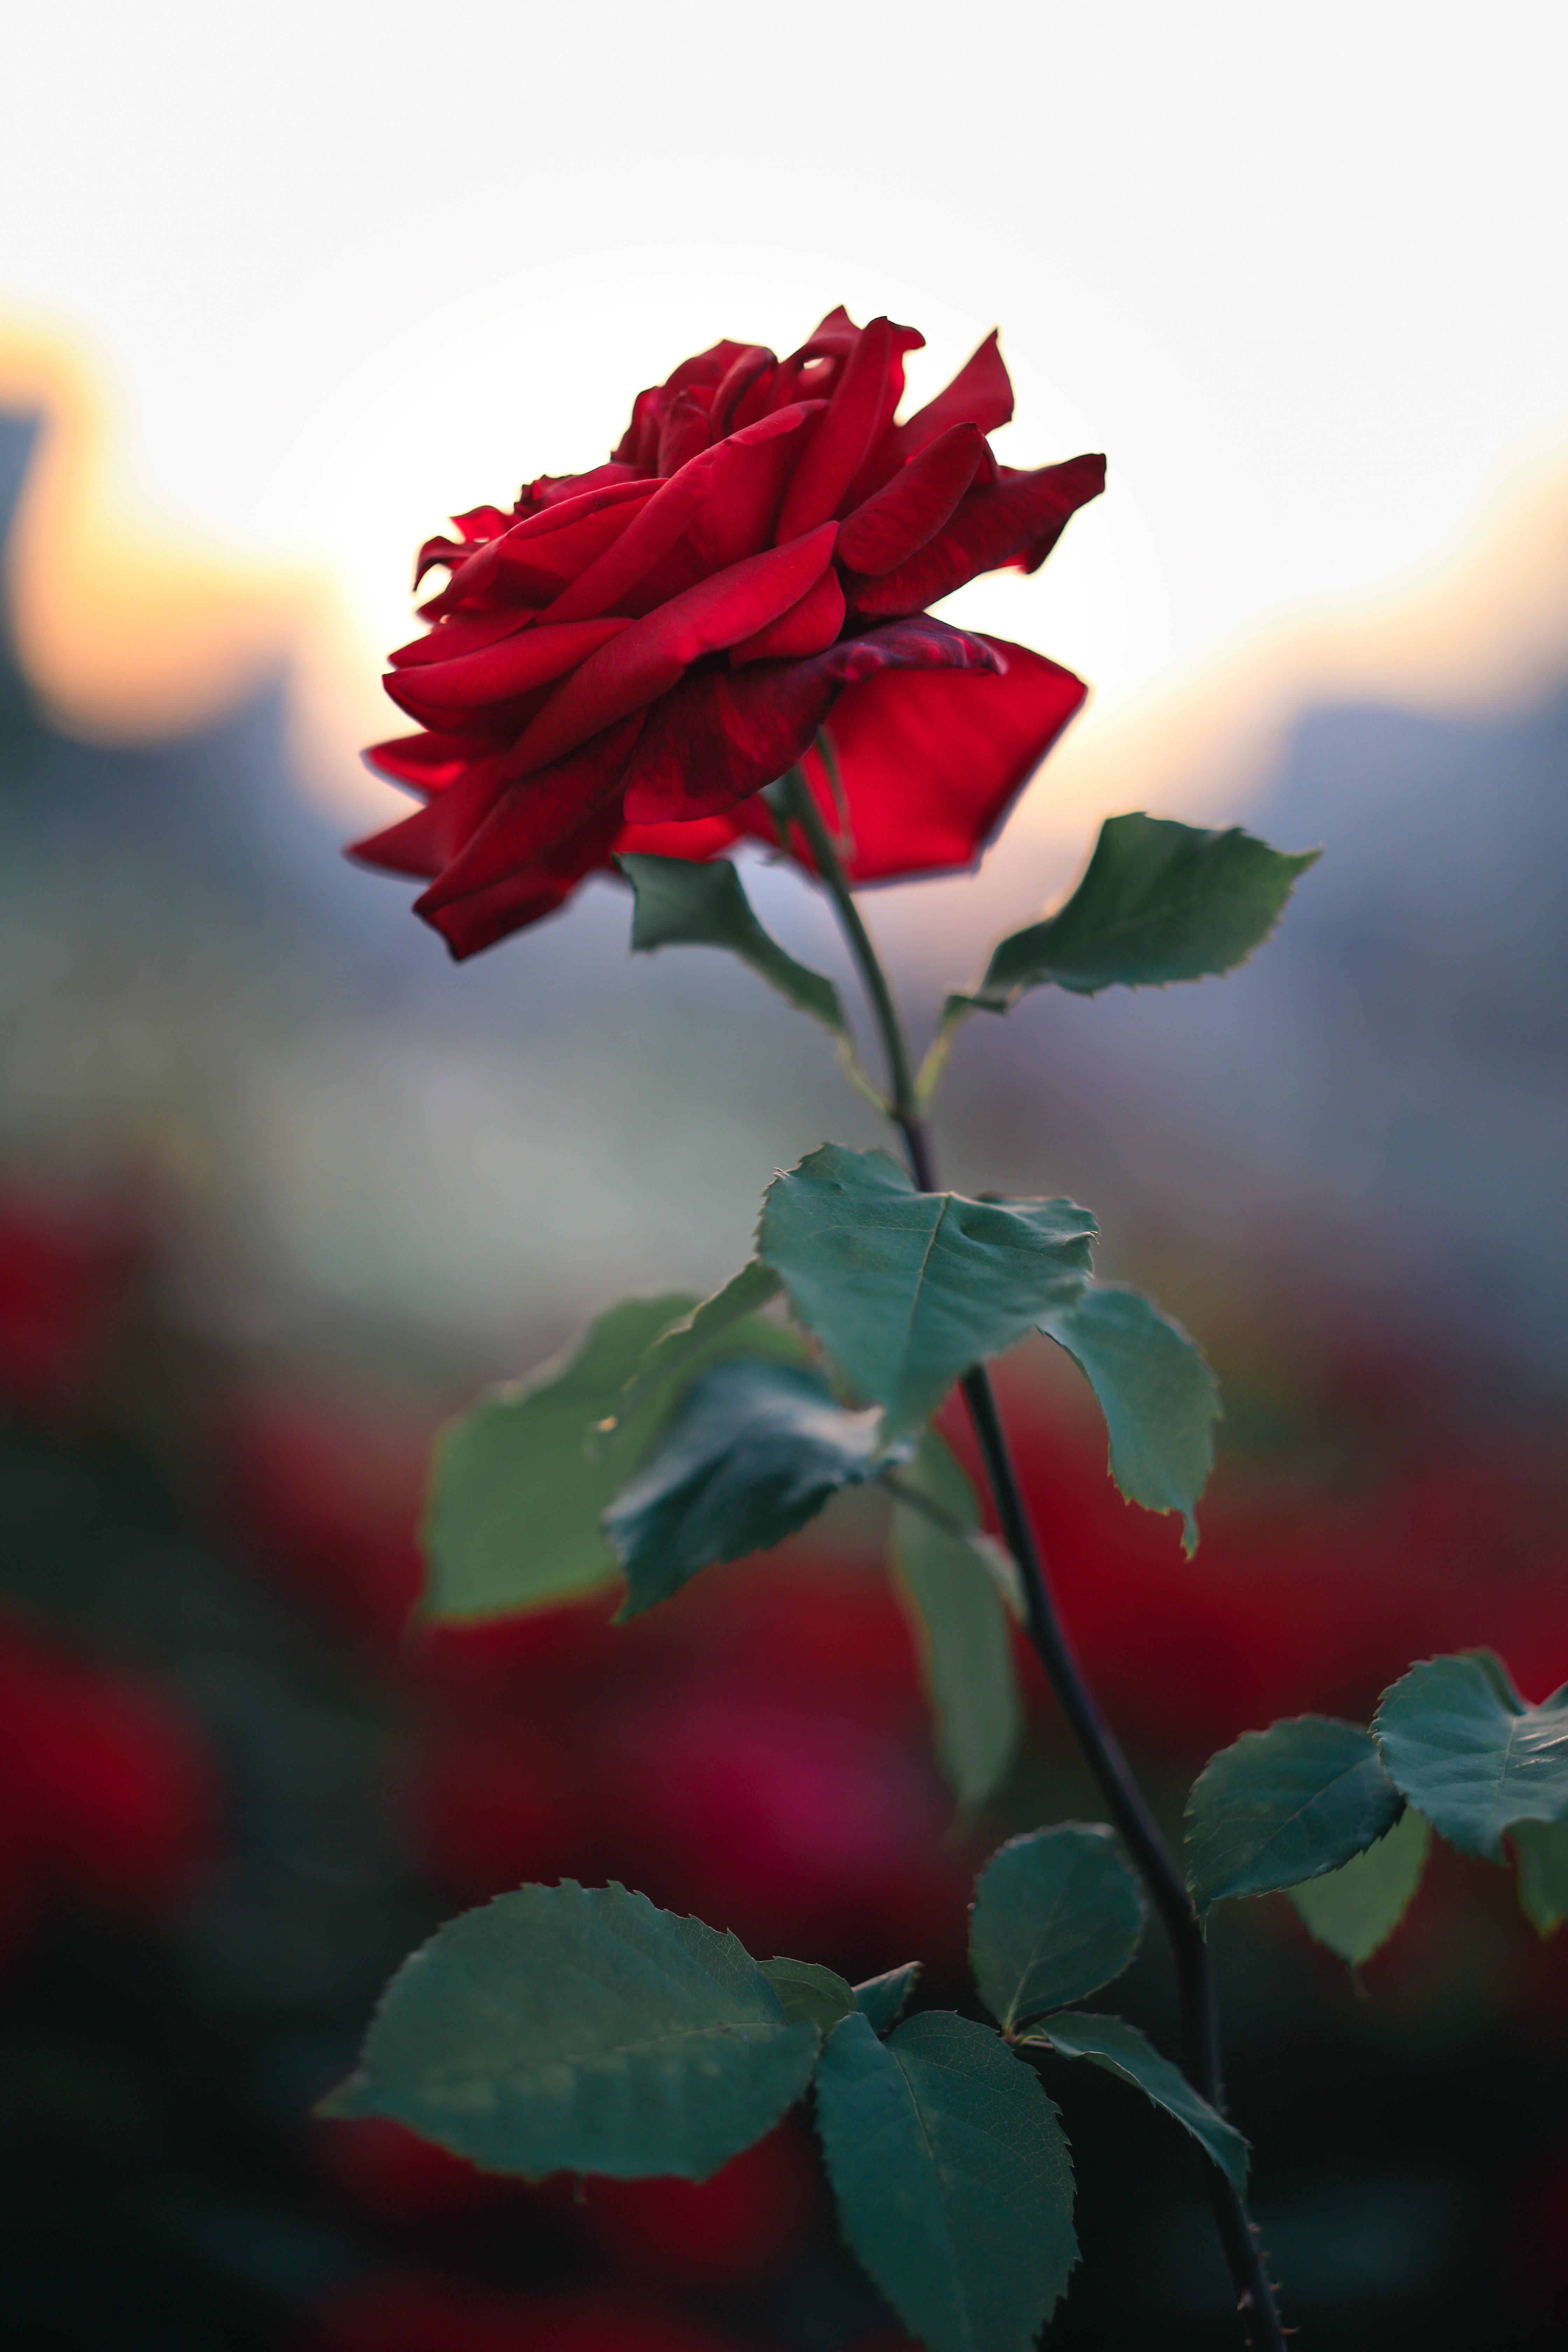 Red Rose 4K Wallpapers